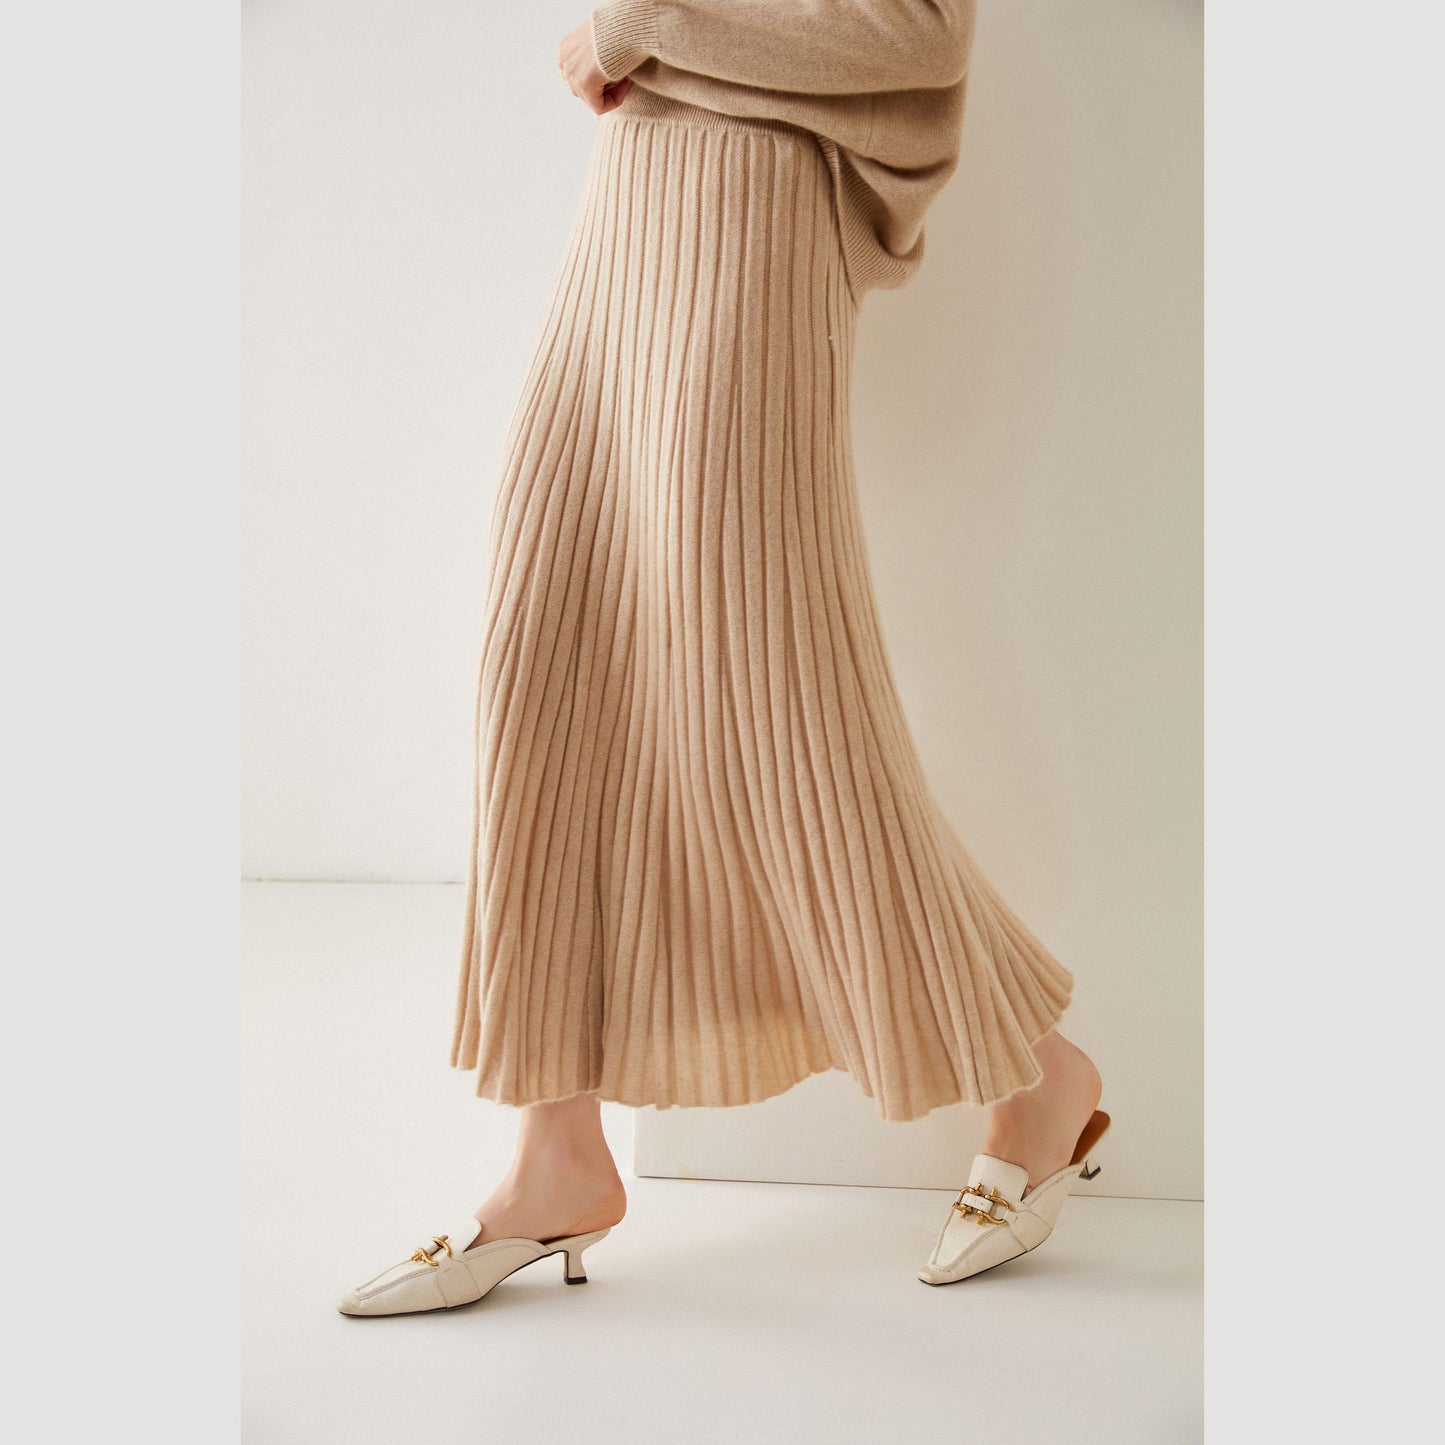 2021 Top Selling Skirt - Pure Cashmere Skirt  by Bonolu